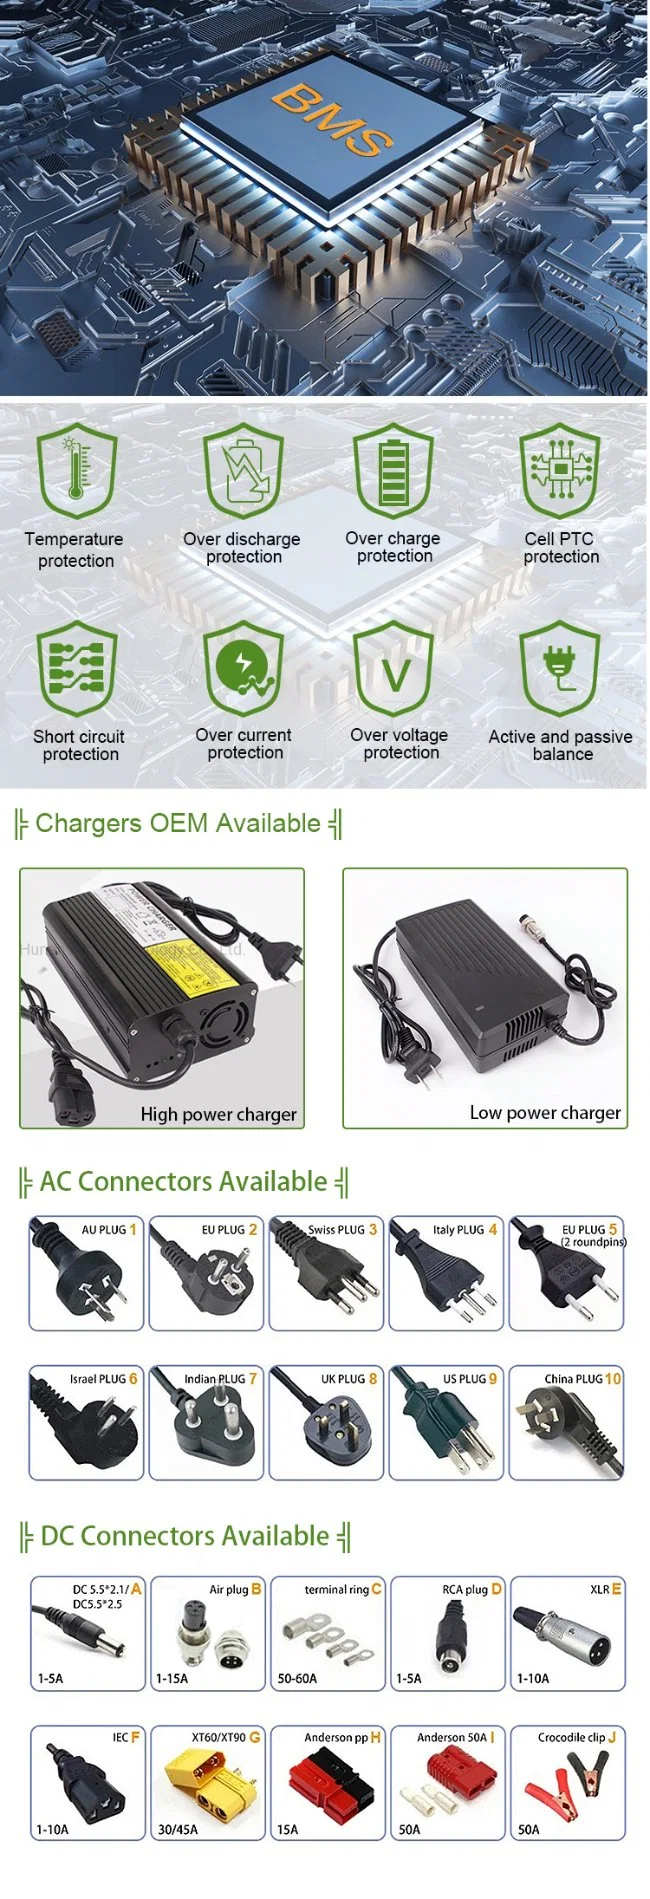 CTS Electric Motorcycle Scooter E-Bike Lithium Ion Battery 48V 60V 72V 96V 20ah 30ah 40ah 50ah 60ah 80ah 100ah LiFePO4 Lithium Battery